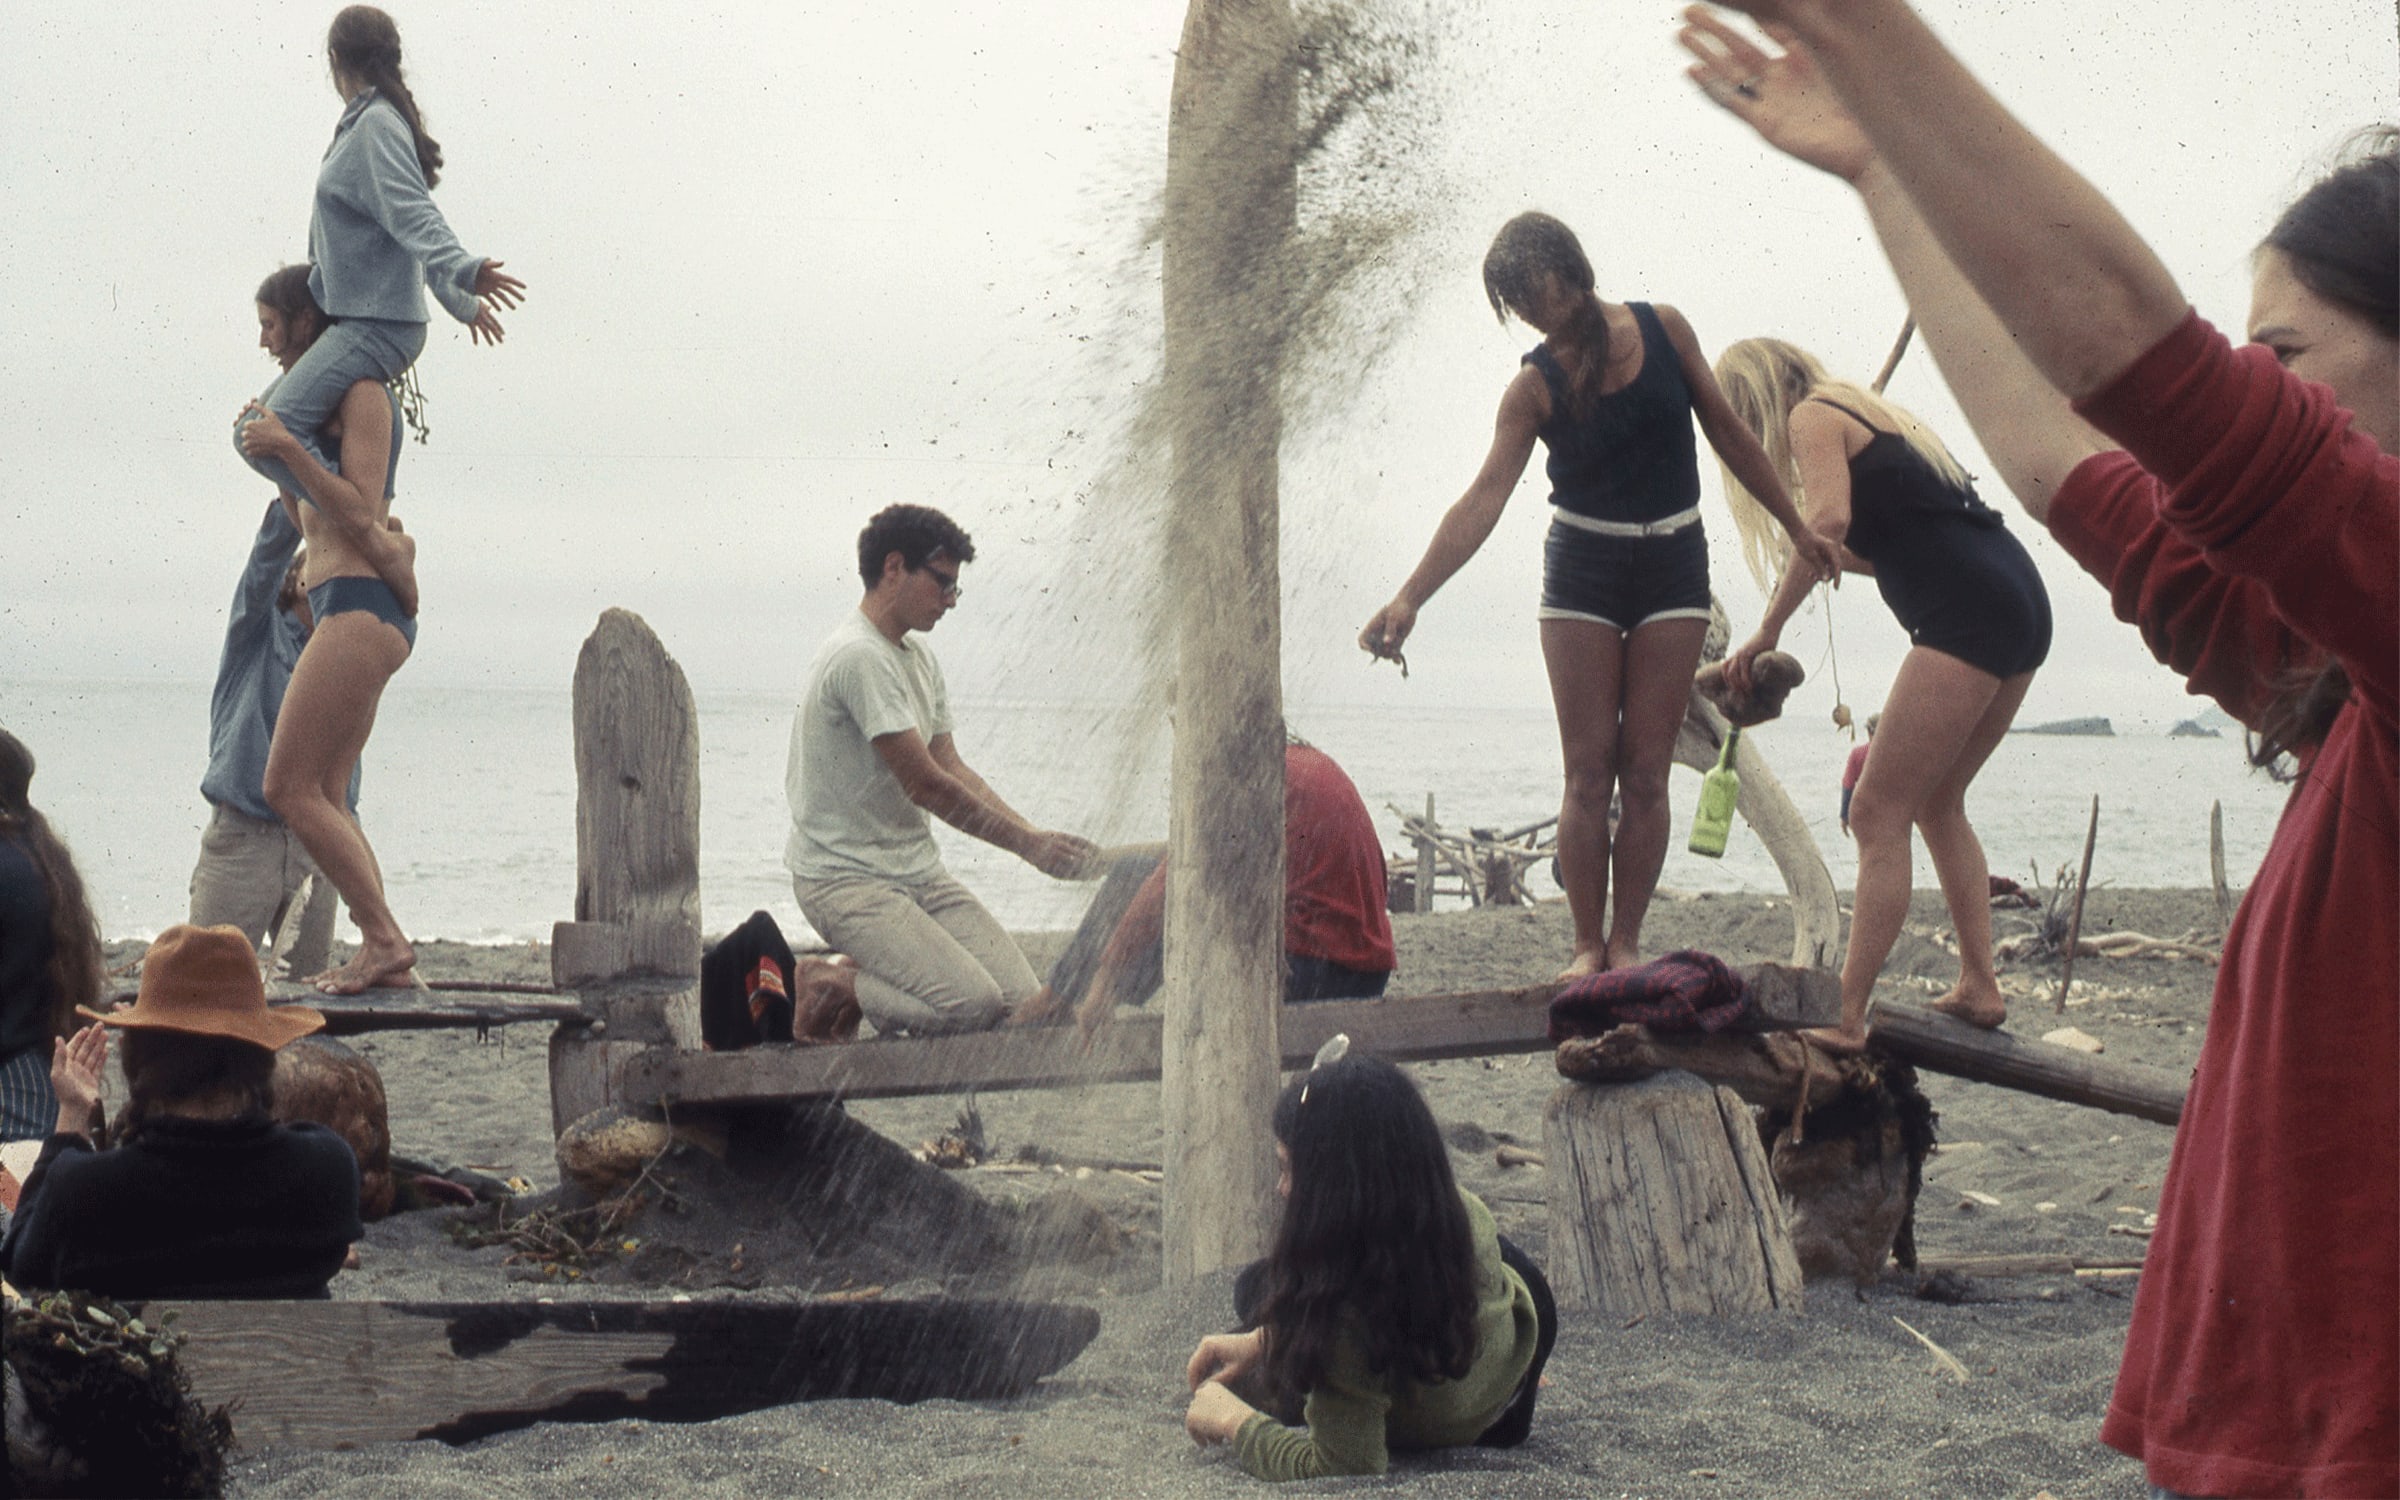 Anna Halprin (American, 1920–2021), Lawrence Halprin (American, 1916–2009). Experiments in Environment Workshops, 1966–71. Participants in the Sea Ranch Driftwood Village Rebuilt event, Sea Ranch, California. 1968. University of Pennsylvania. The Architectural Archives. Lawrence Halprin Collection